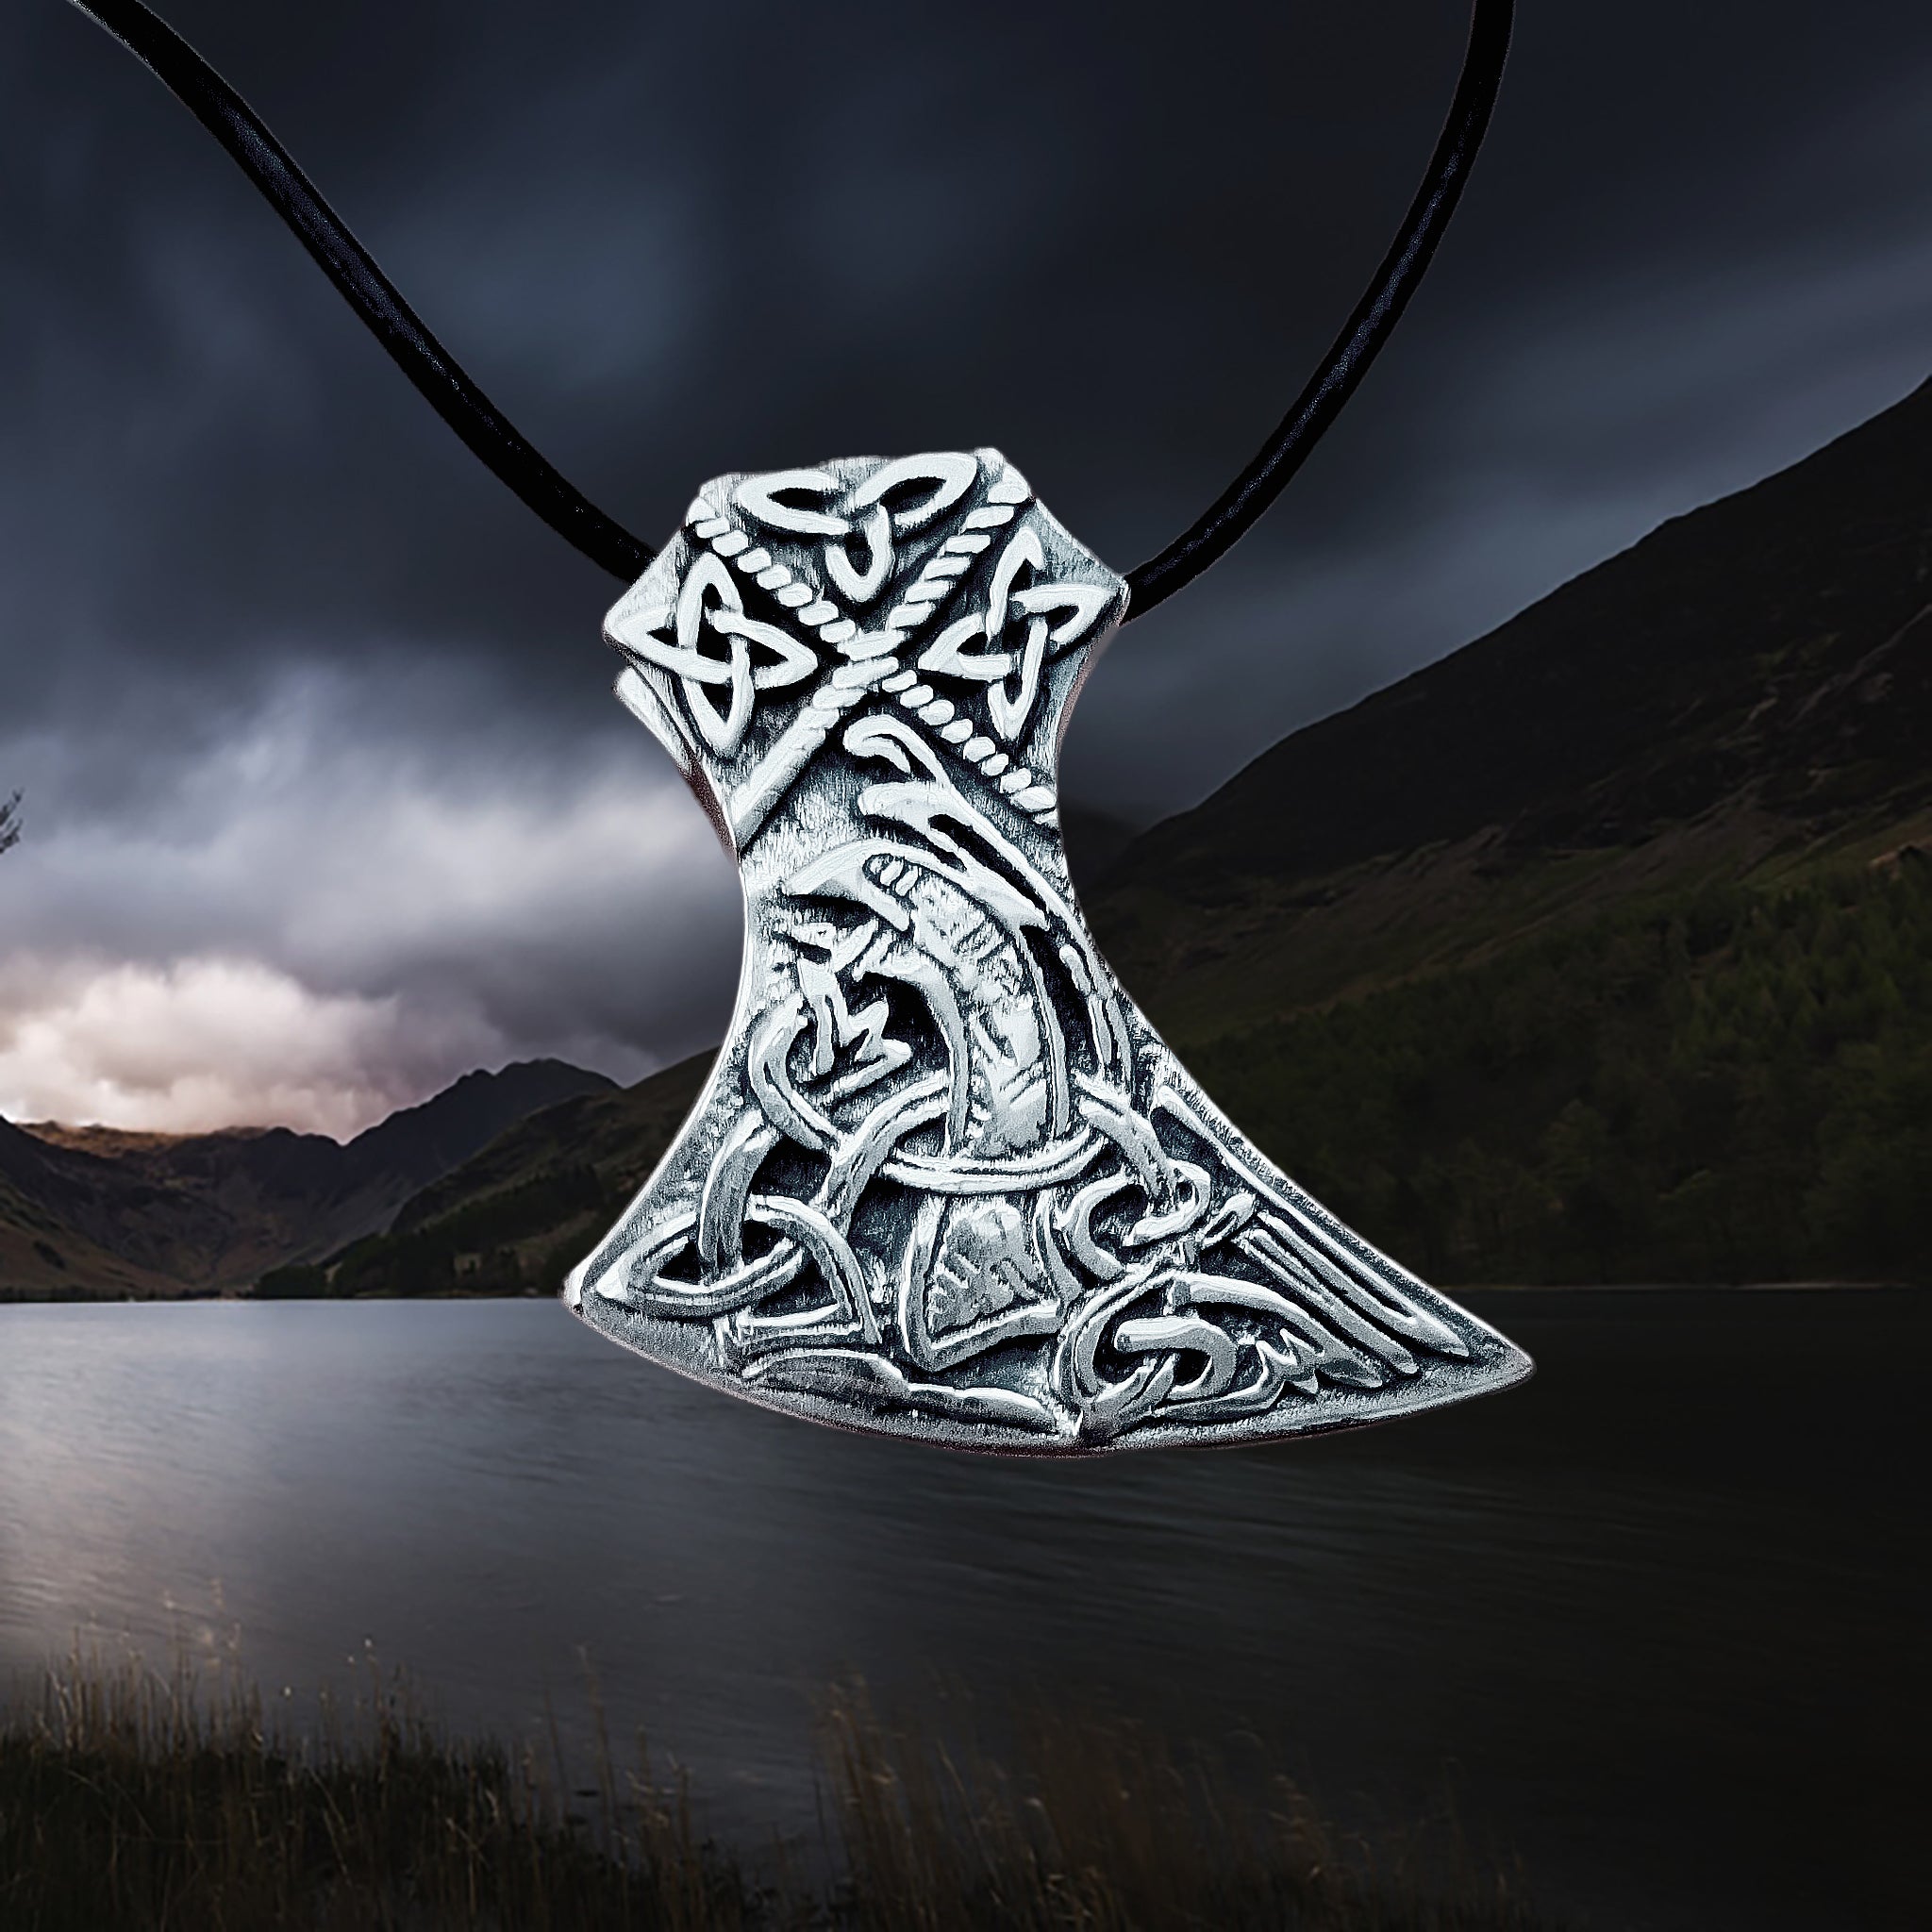 Silver Knotwork Viking Axe Head Pendant on Leather Thong